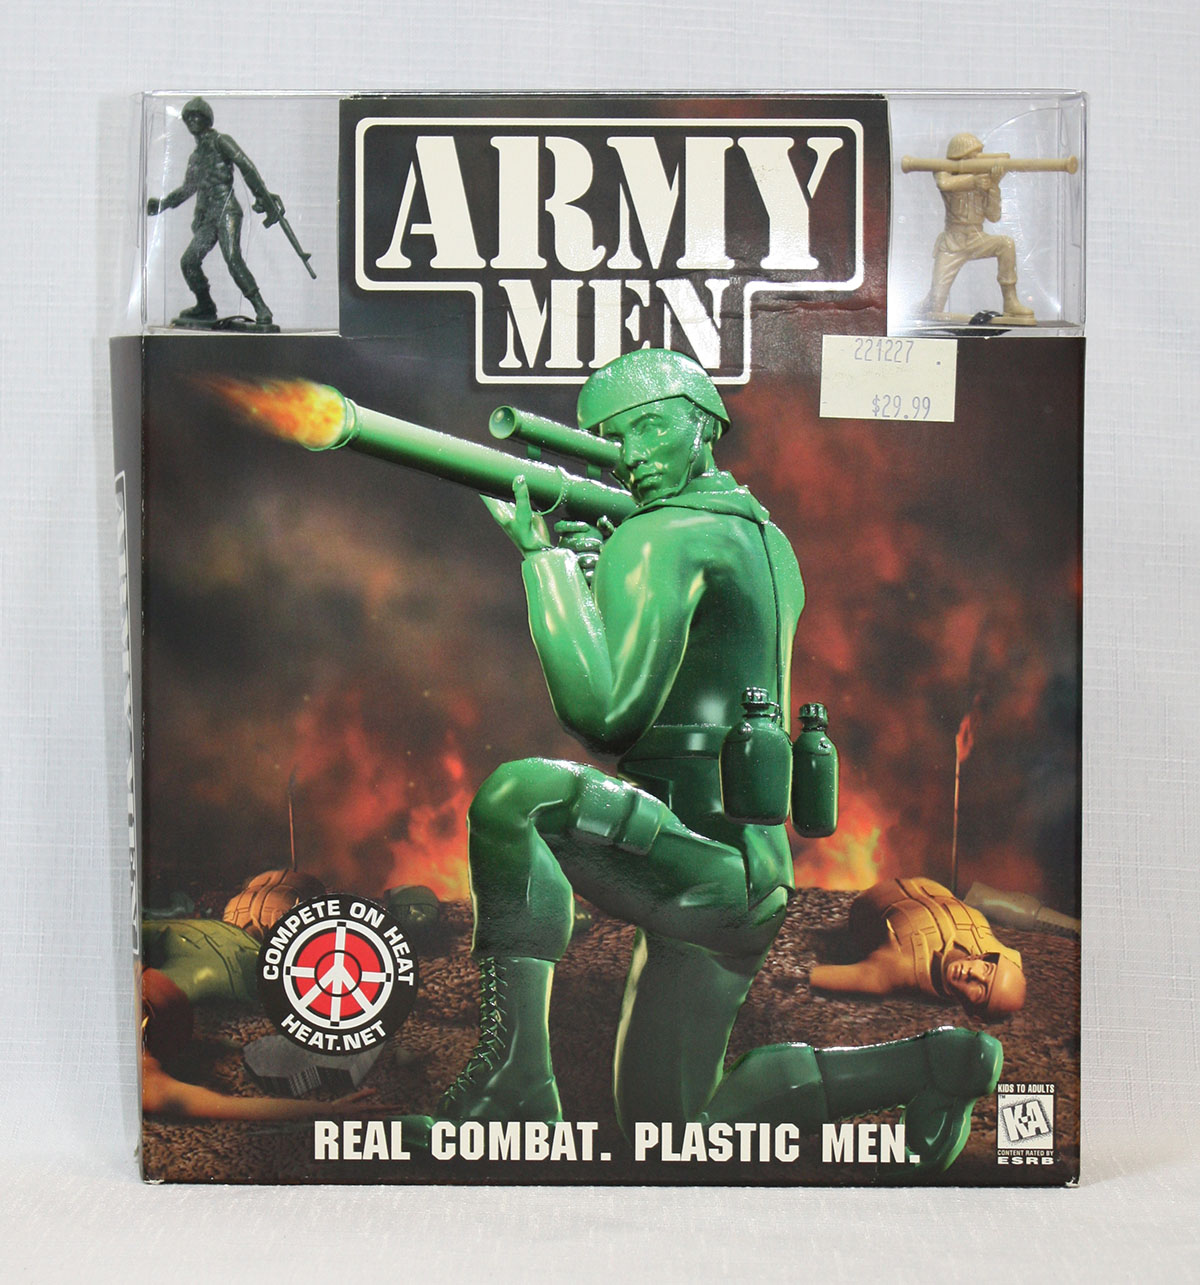 Return of the Army Men The Digital Game Museum